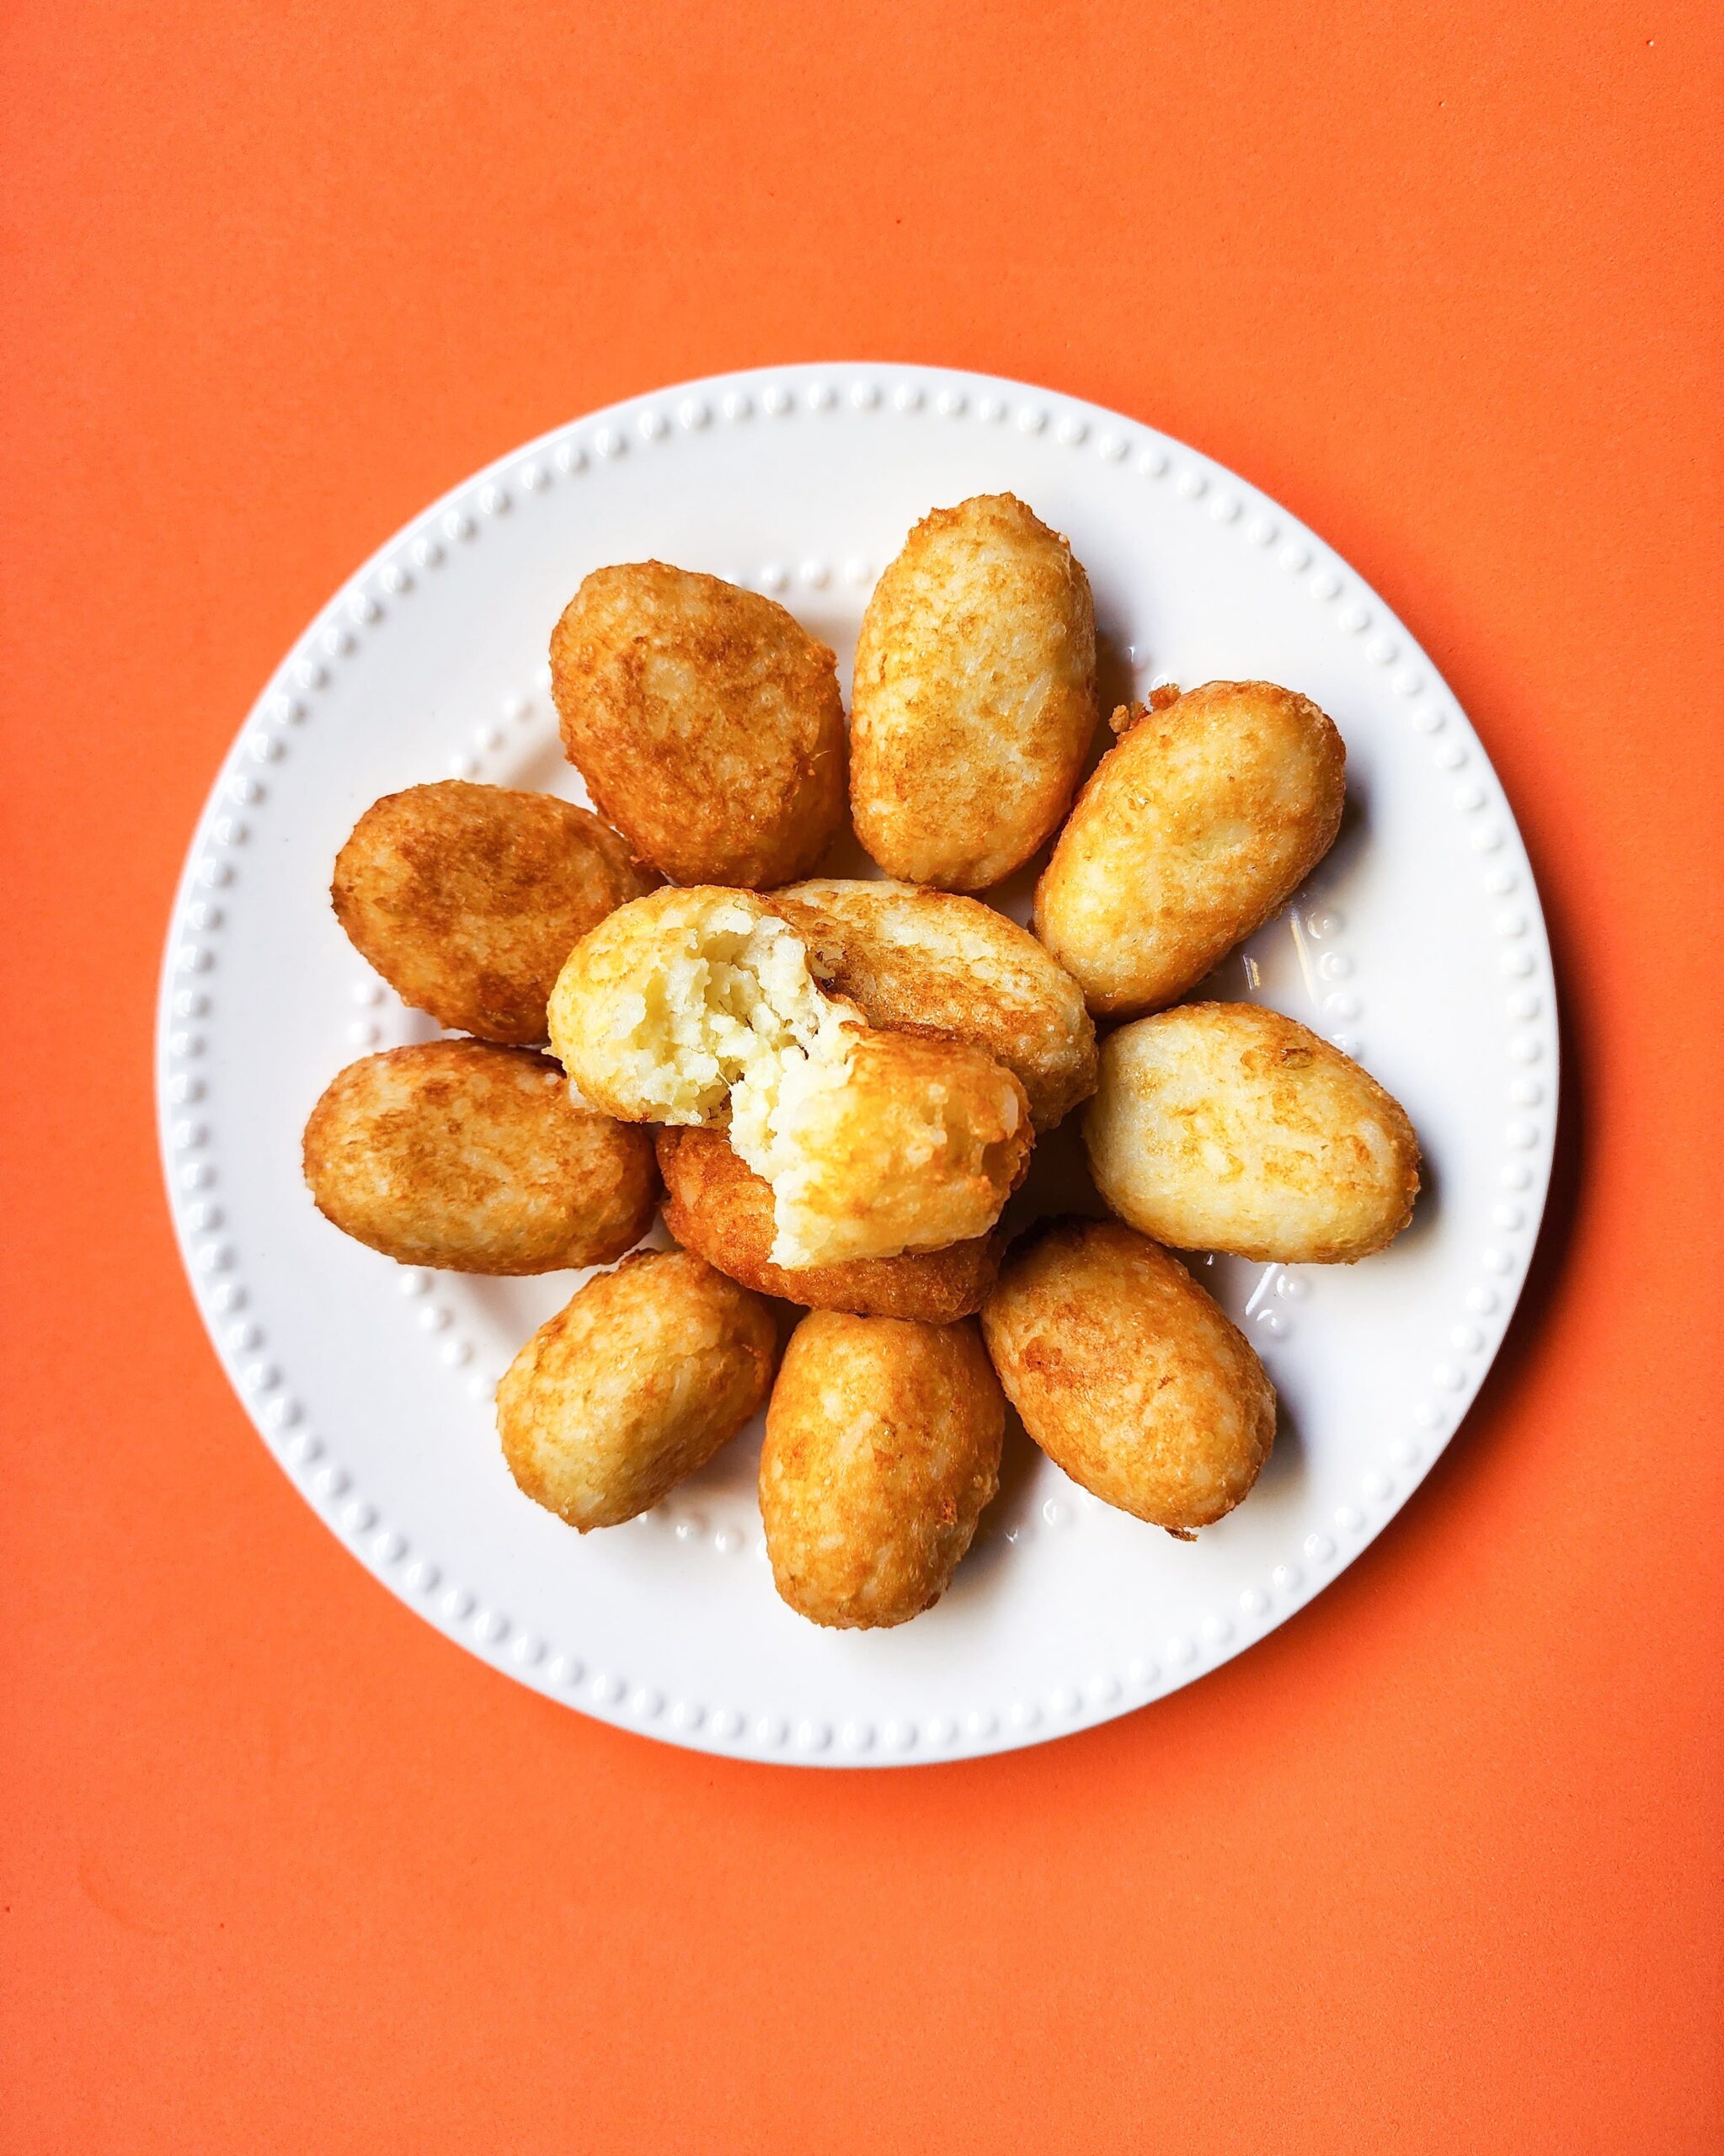 croquettes on a plate